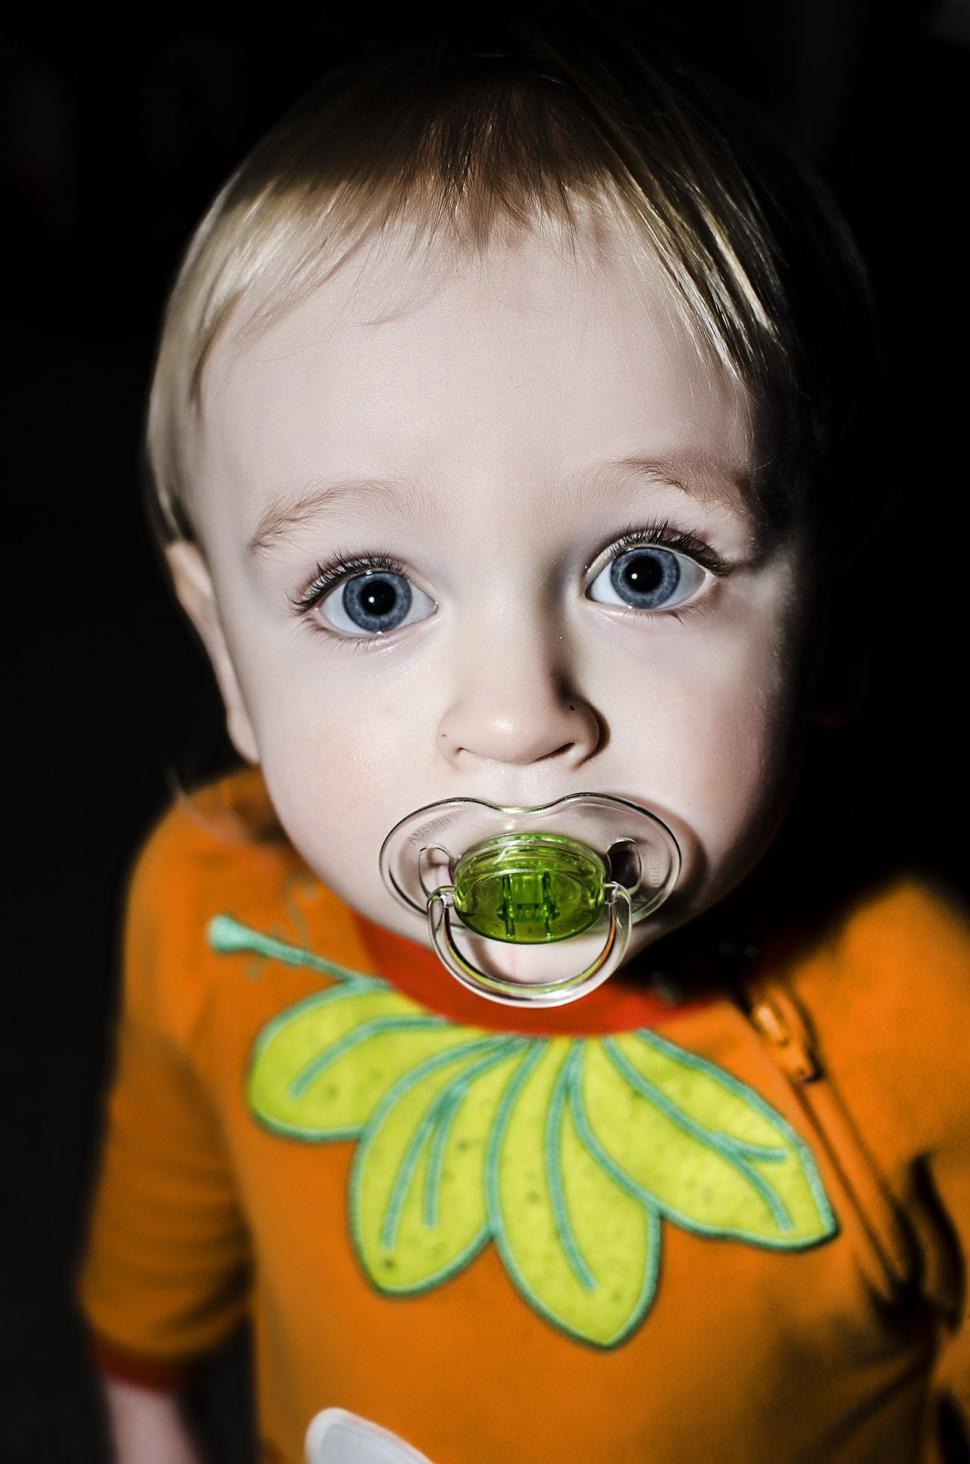 Free Image of Baby with air pacifier - looking at camera  